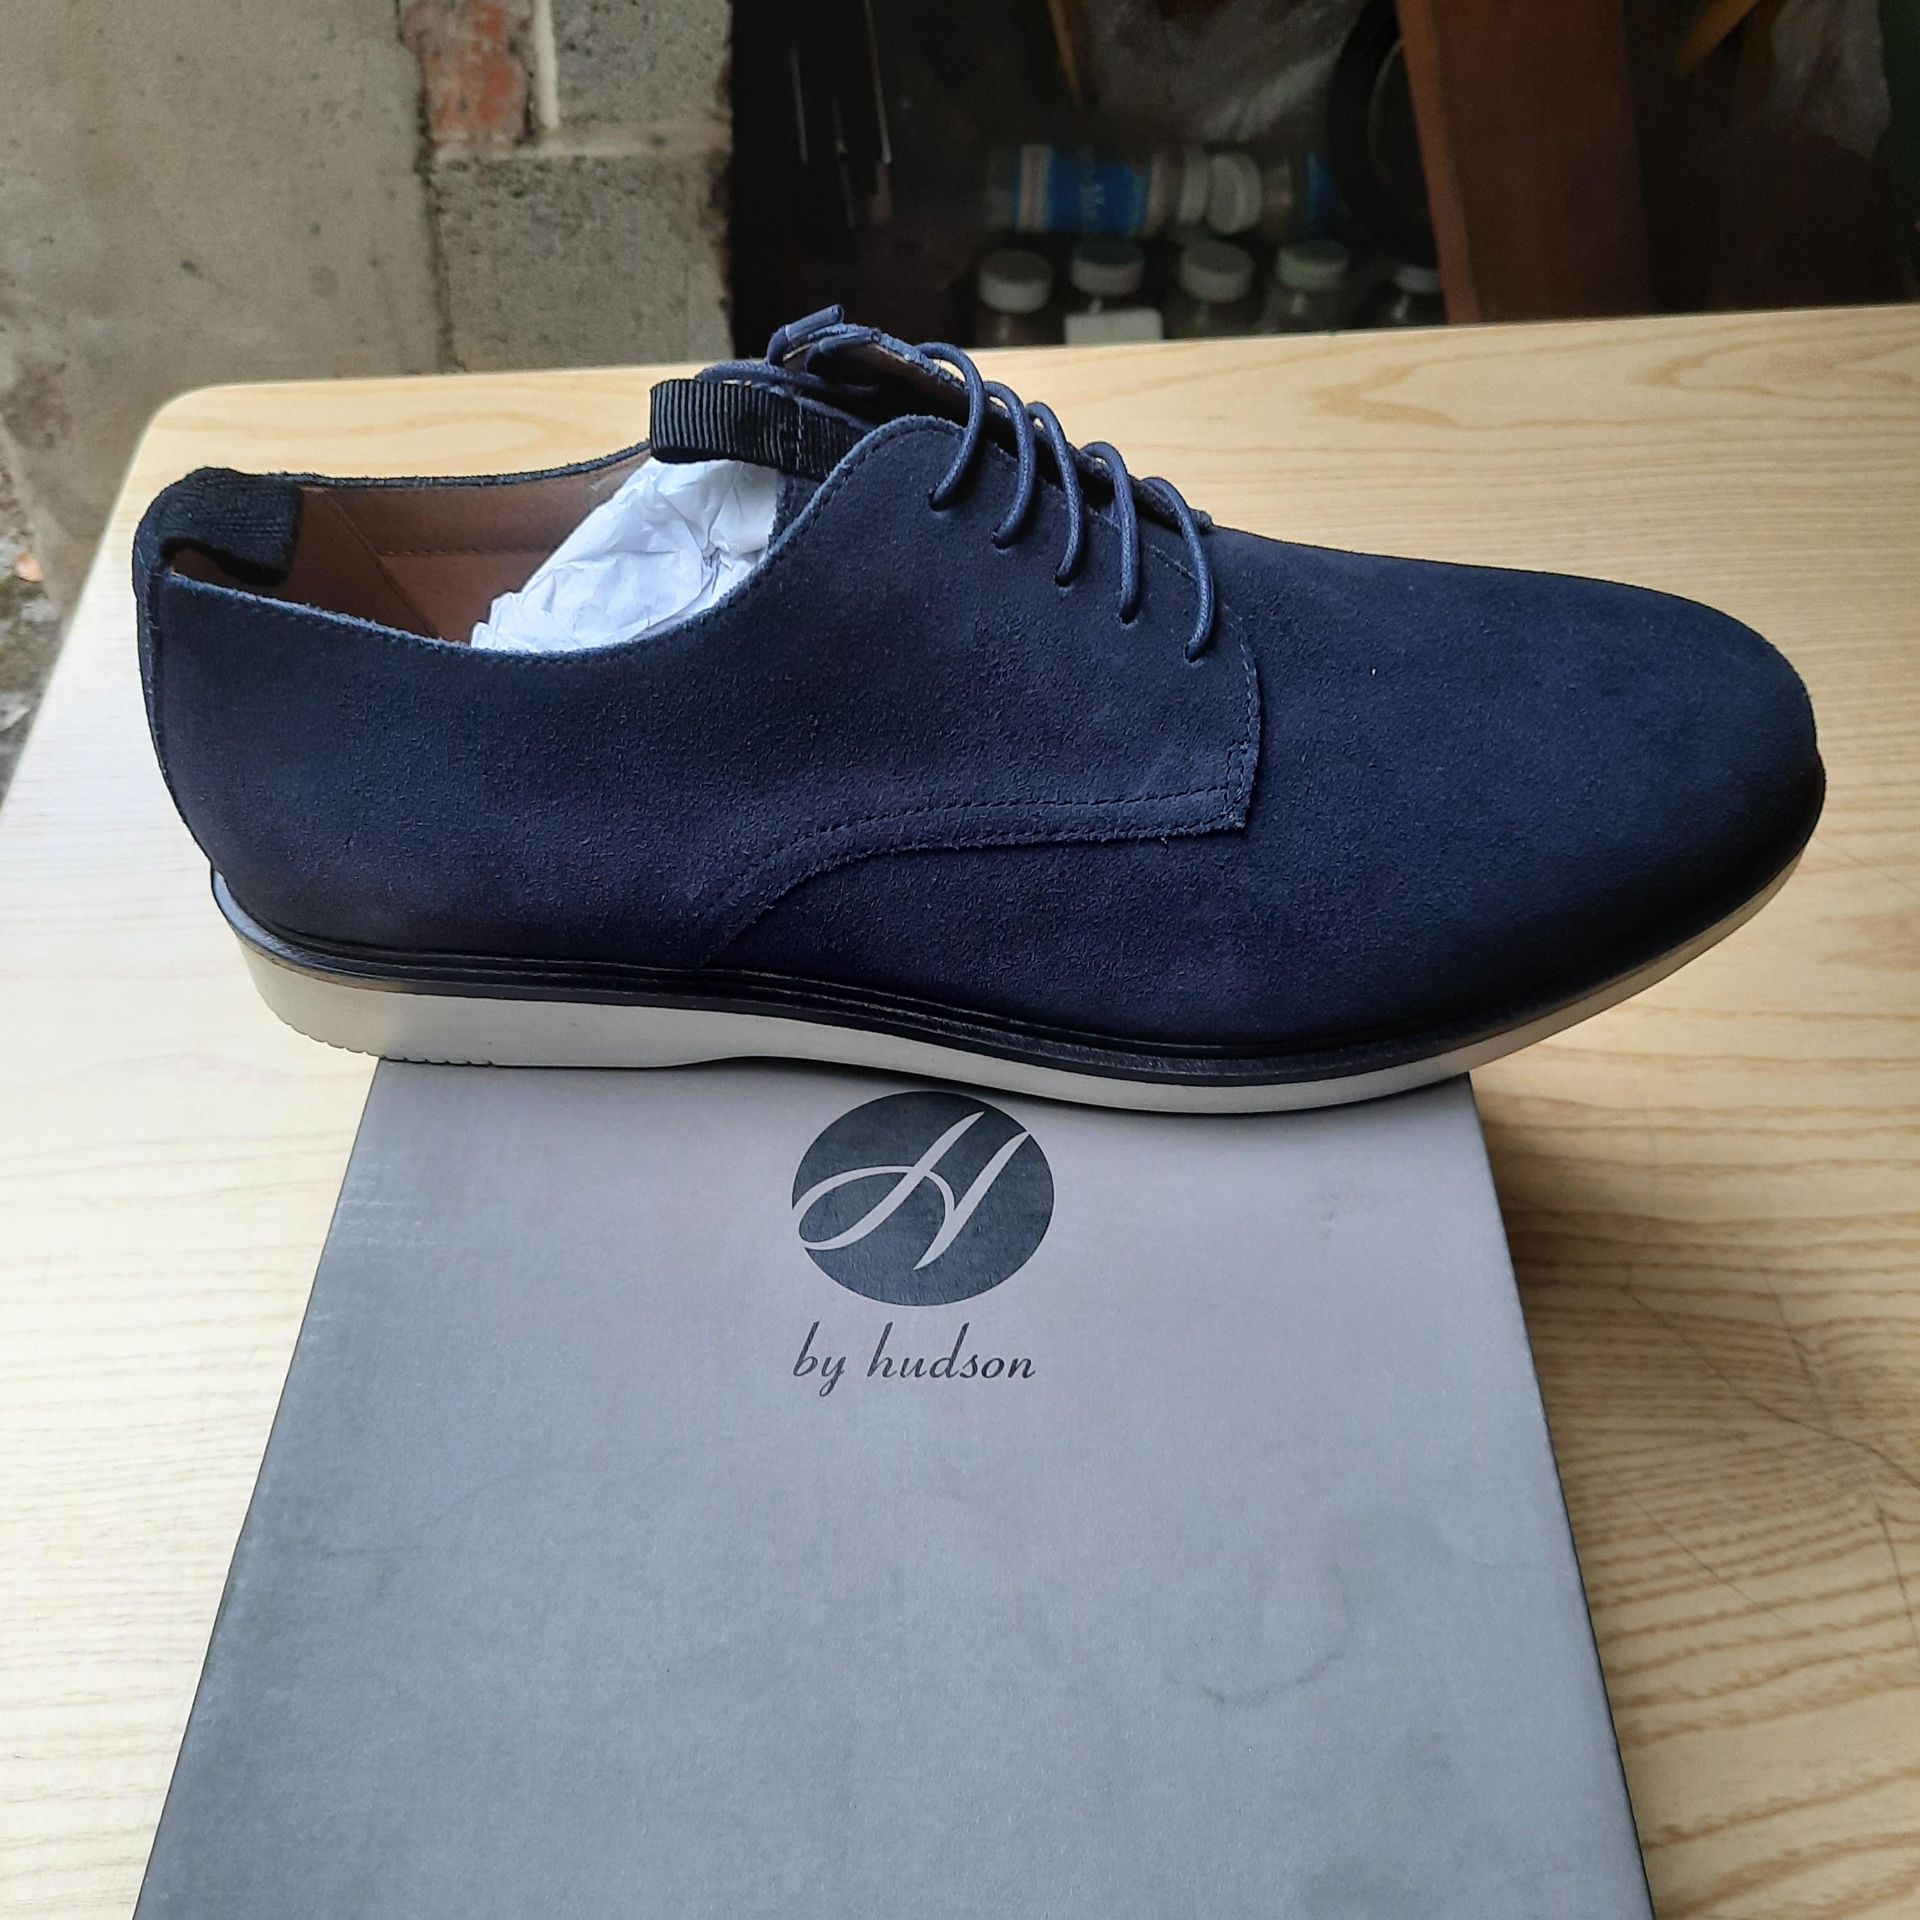 BOXED AND NEW CALVESTON NAVY GENTLEMANS SHOES SIZE UK - 10/ EU - 44/ US -11 BY HUDSON. RRP £65